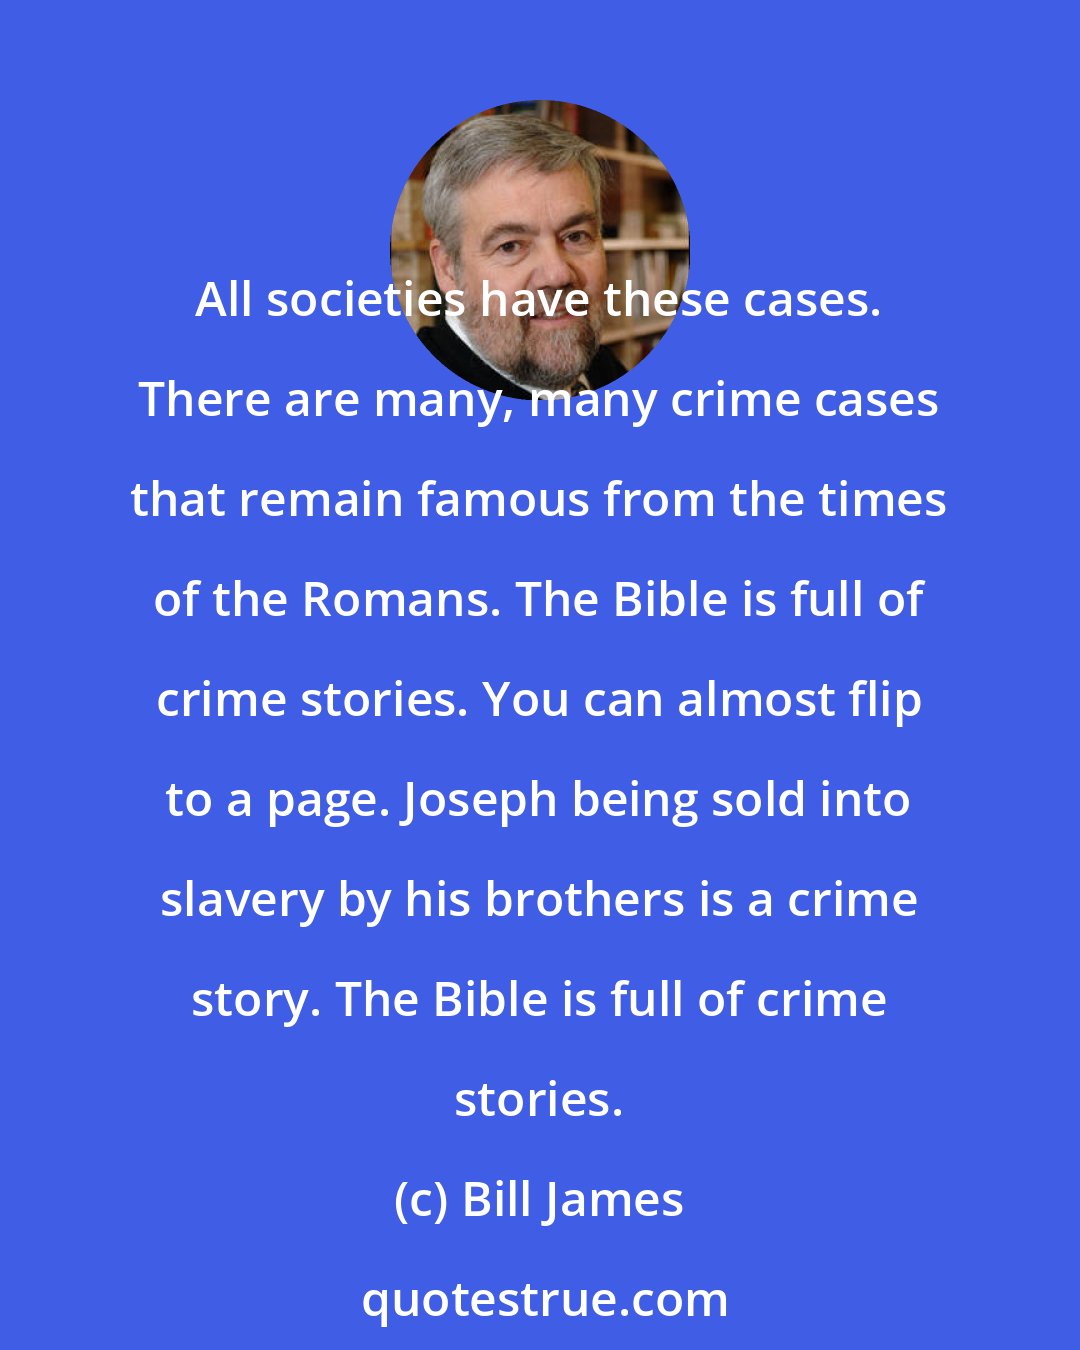 Bill James: All societies have these cases. There are many, many crime cases that remain famous from the times of the Romans. The Bible is full of crime stories. You can almost flip to a page. Joseph being sold into slavery by his brothers is a crime story. The Bible is full of crime stories.